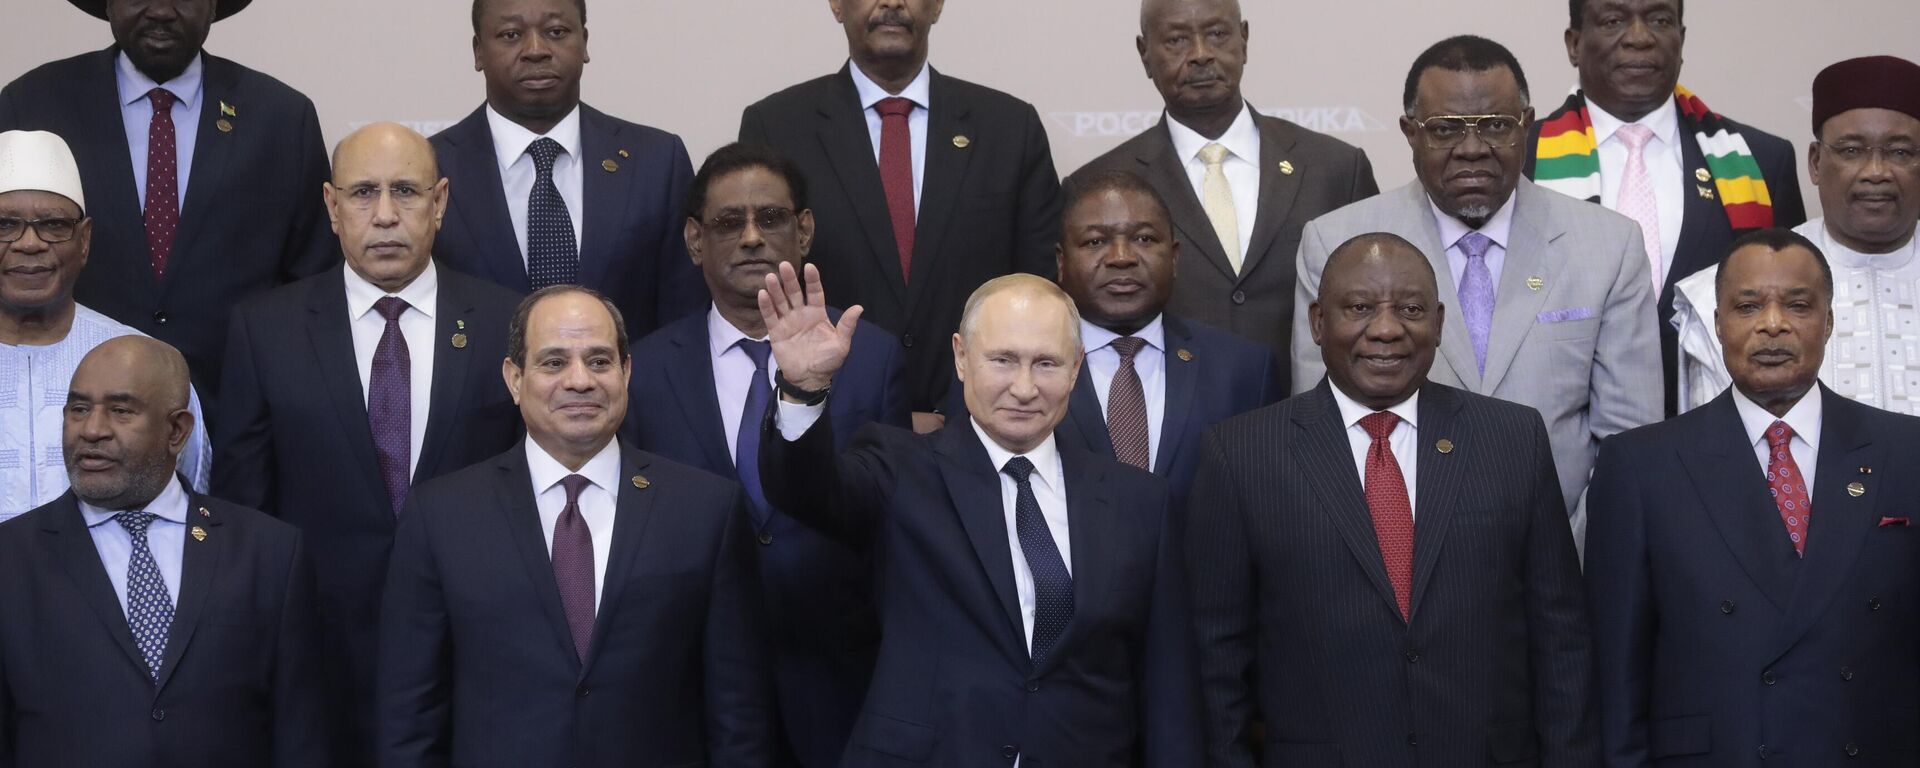 Russian President Vladimir Putin, center, poses for a photo with leaders of African countries at the Russia-Africa summit in the Black Sea resort of Sochi, Russia, on Oct. 24, 2019.  - Sputnik International, 1920, 31.03.2023